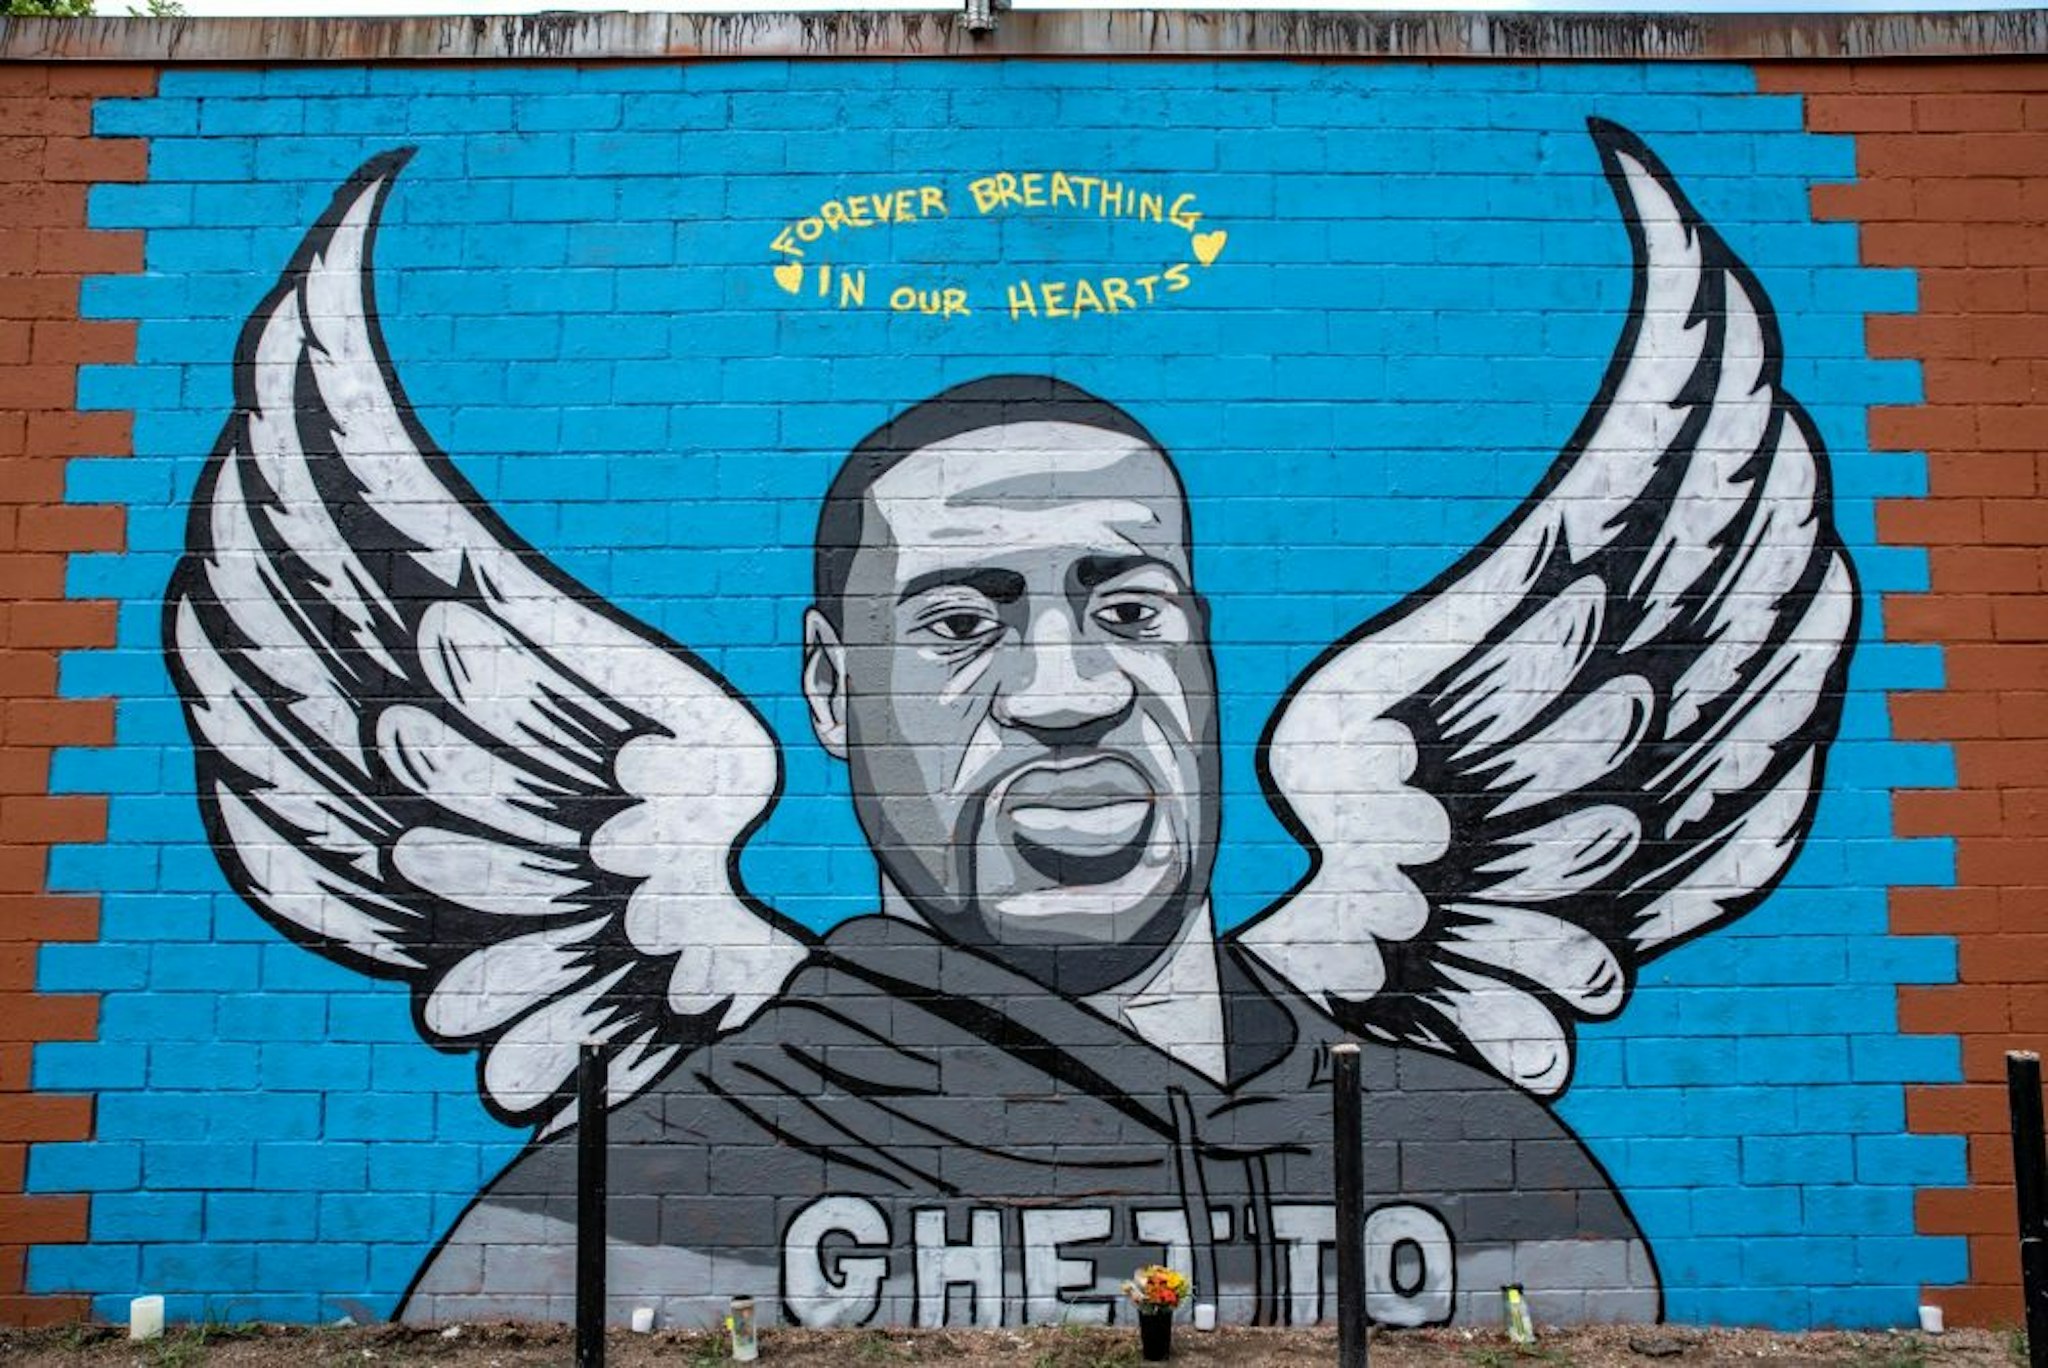 HOUSTON, TX - JUNE 02: A mural of George Floyd is shown painted on the side of Scott Food Mart in the Third Ward before a march in his honor on June 2, 2020 in Houston, Texas. Family members of Floyd were scheduled to participate in a march from Discovery Green to City Hall with support from the local chapter of Black Lives Matter. Floyd, a former resident of the Third Ward, died May 25 while in police custody in Minneapolis, Minnesota.